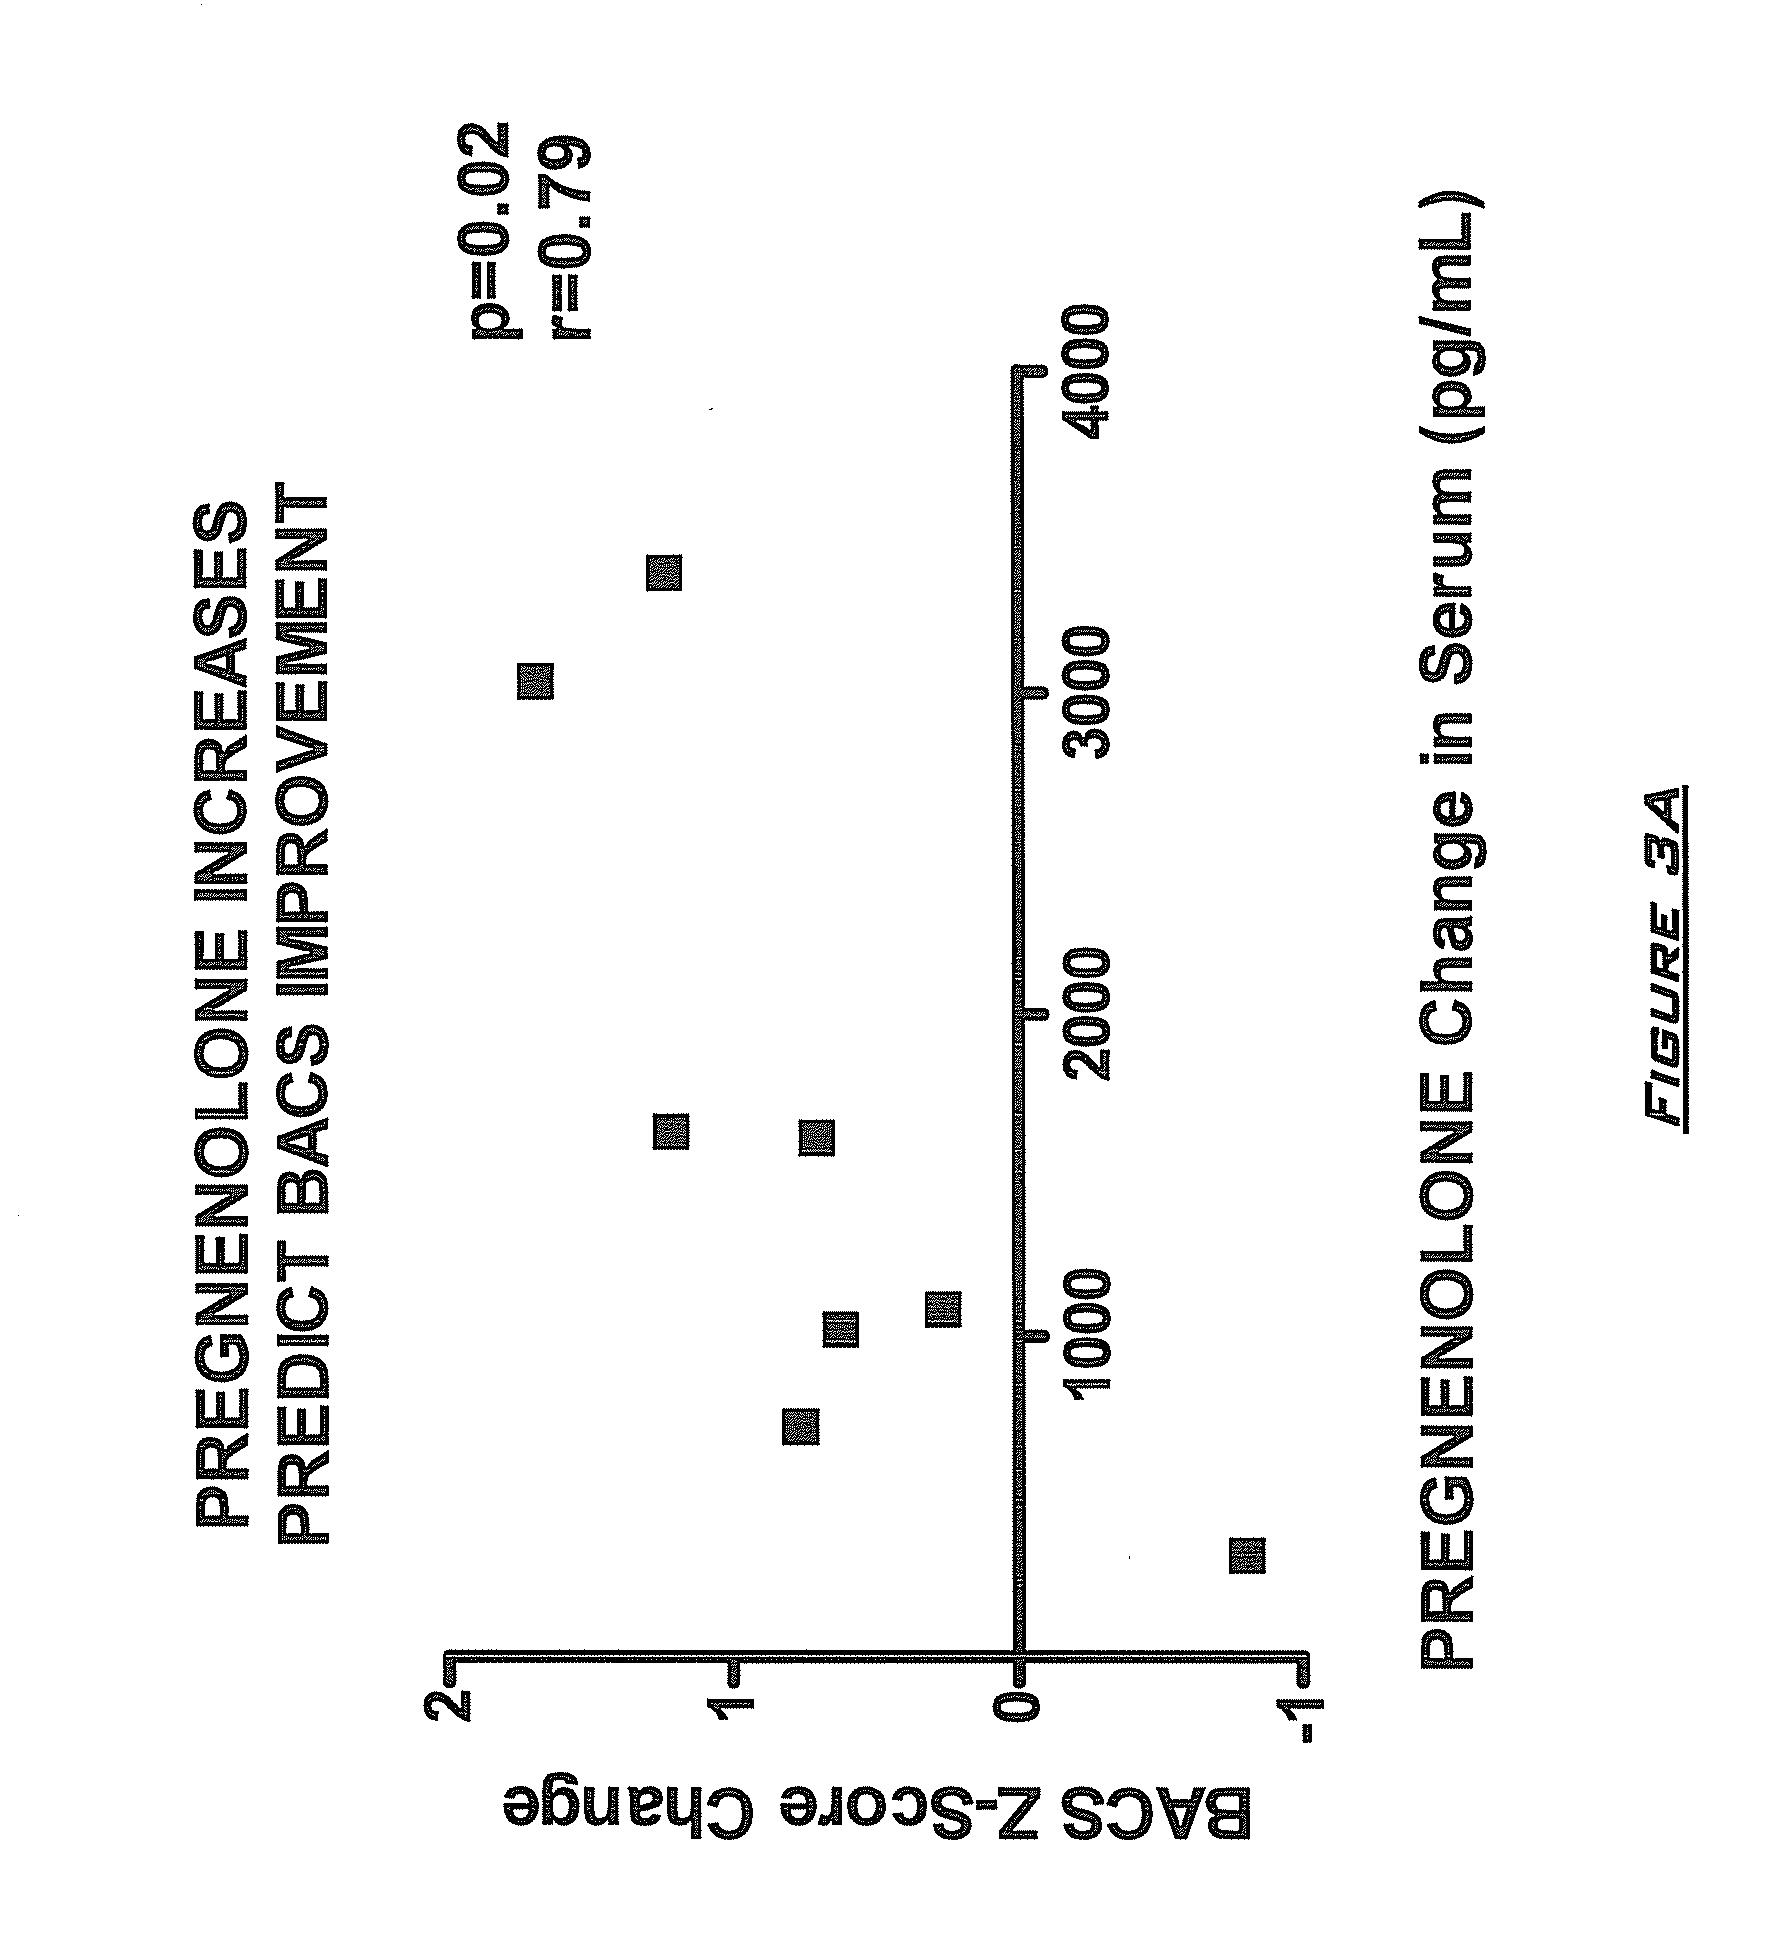 Neuroactive steroid compositions and methods of use therefor